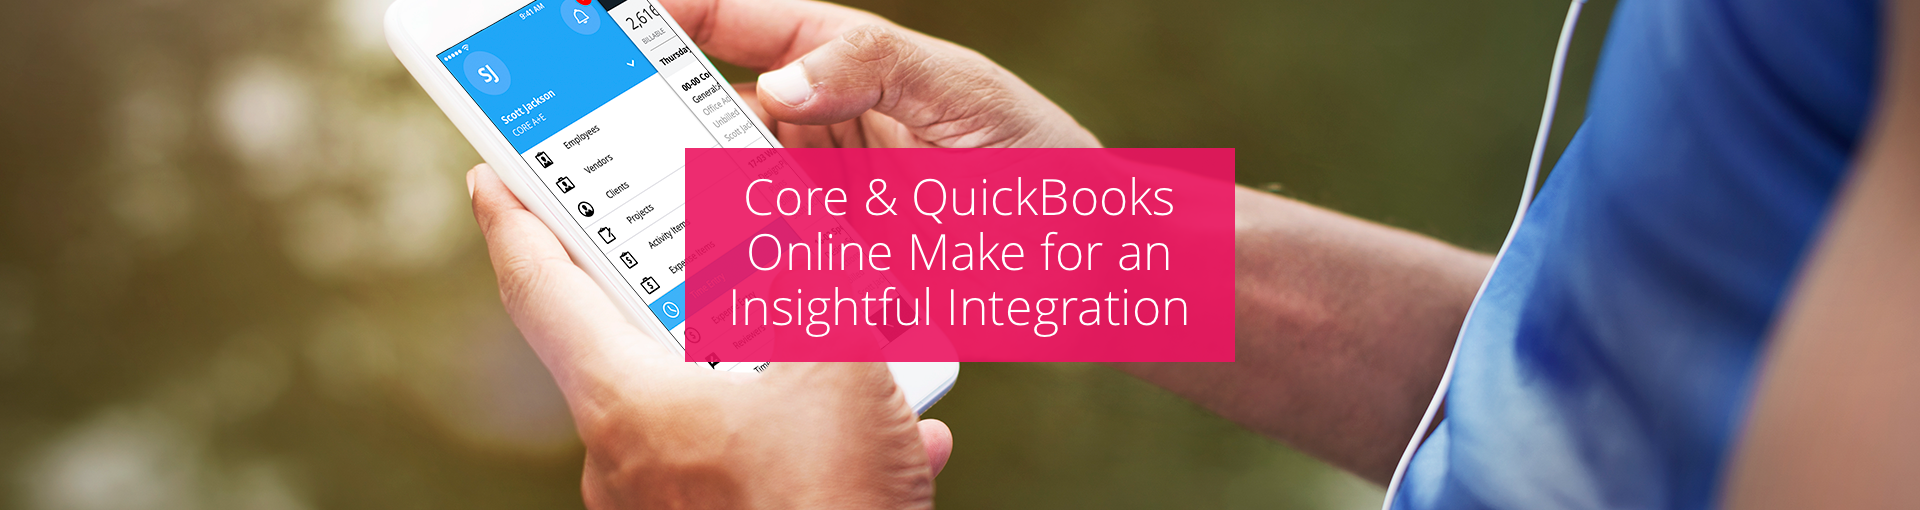 CORE & QuickBooks Online Make for an Insightful Integration Featured Image